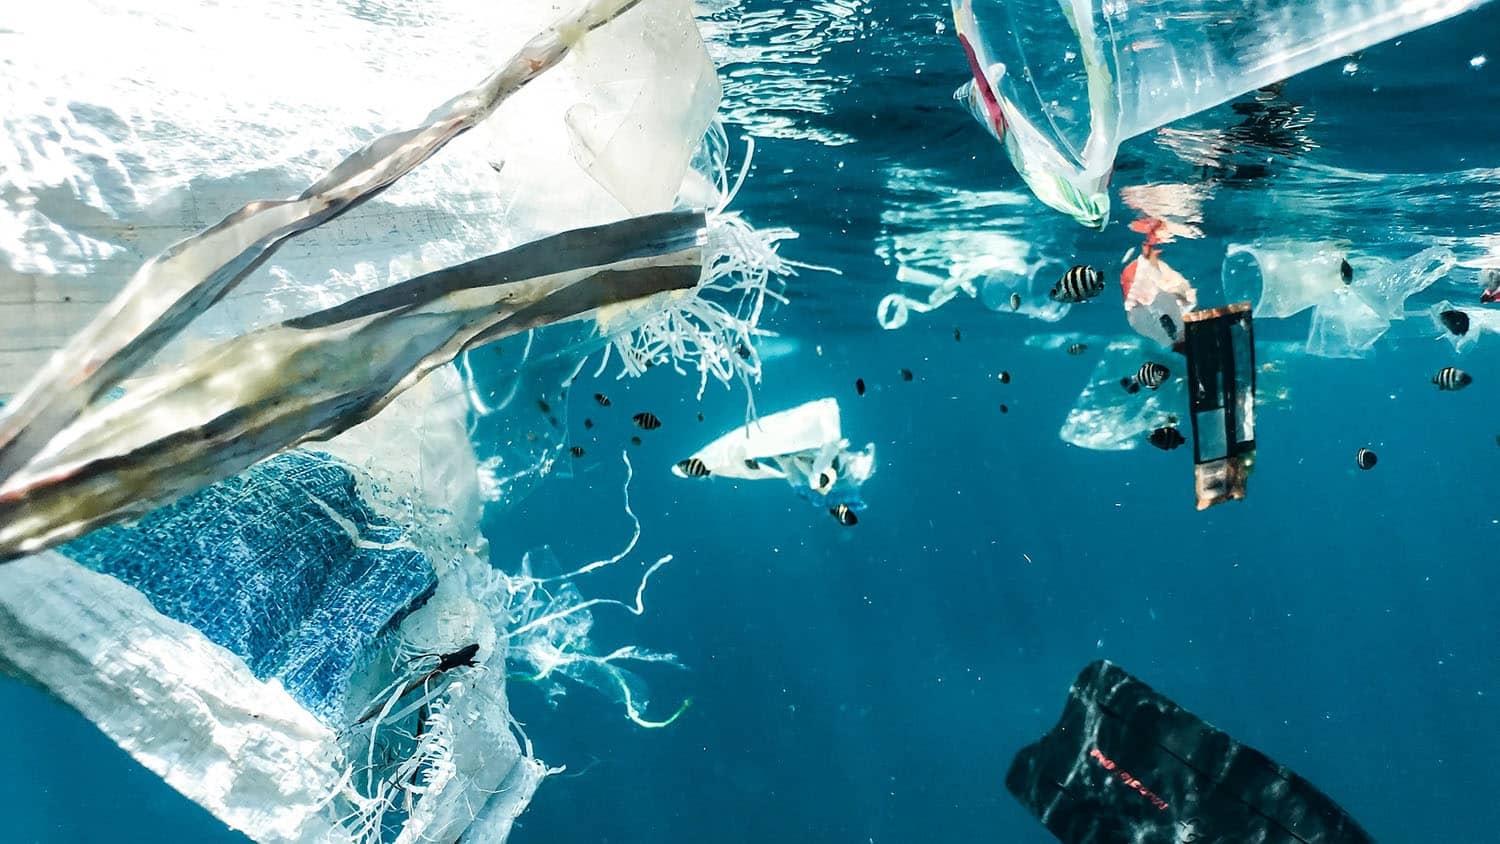 plastic fibers and debris float in blue ocean water with fish swimming nearby